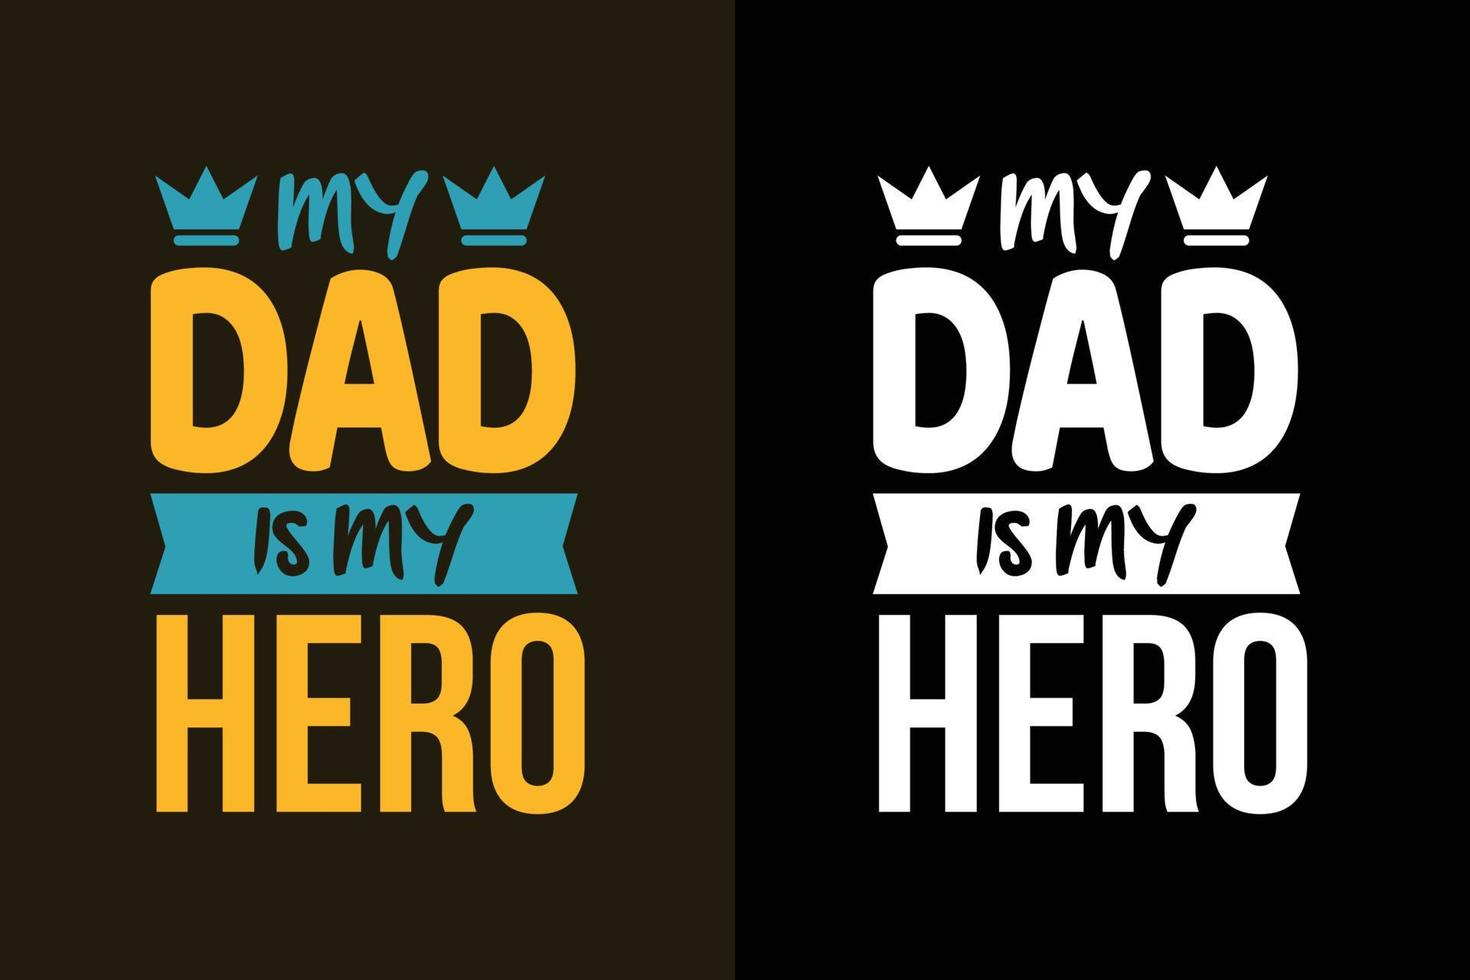 My dad is my hero father's day t shirt design quotes vector